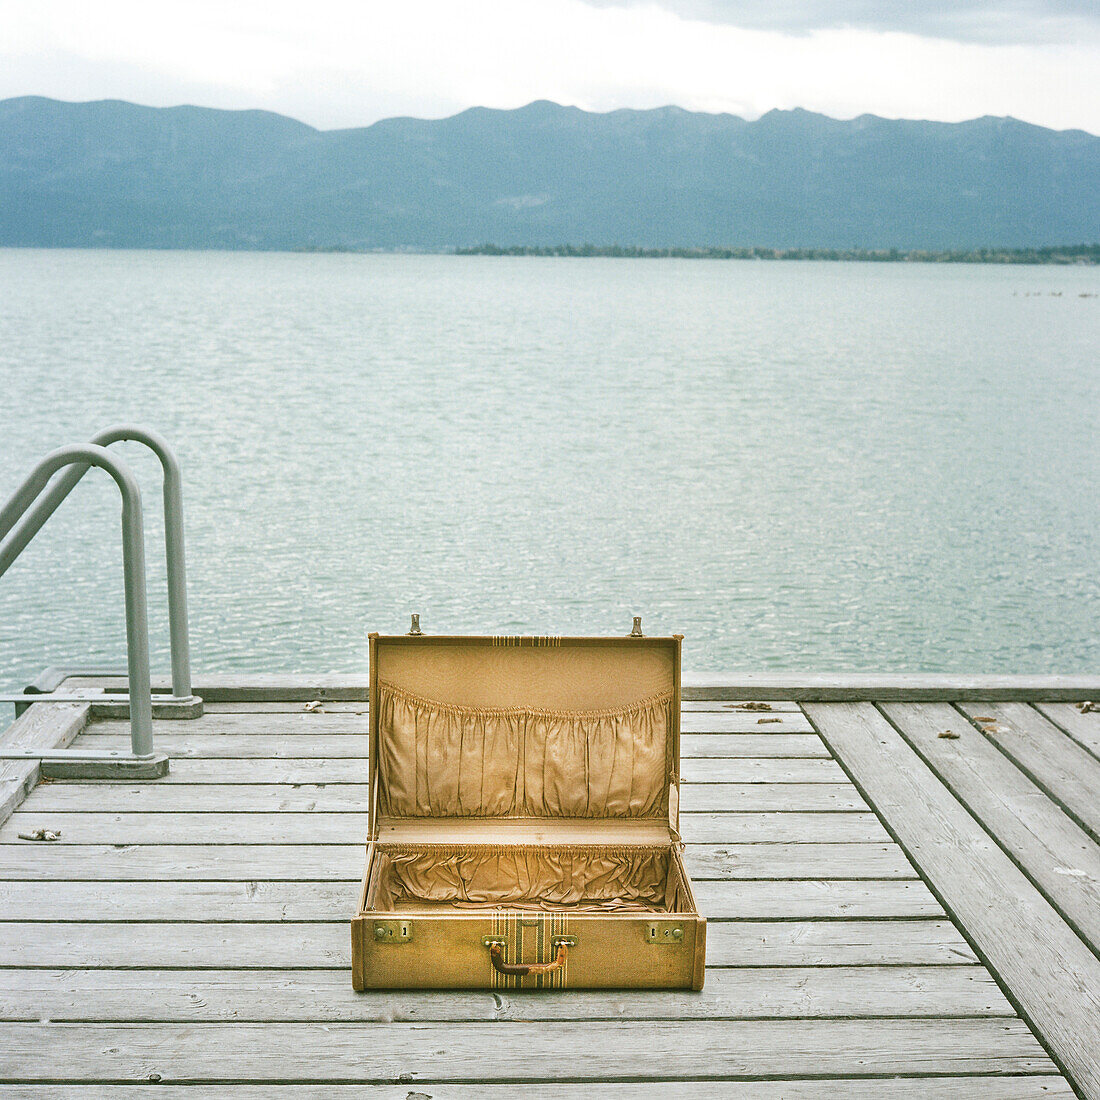 Open Suitcase on Dock with Lake in Background